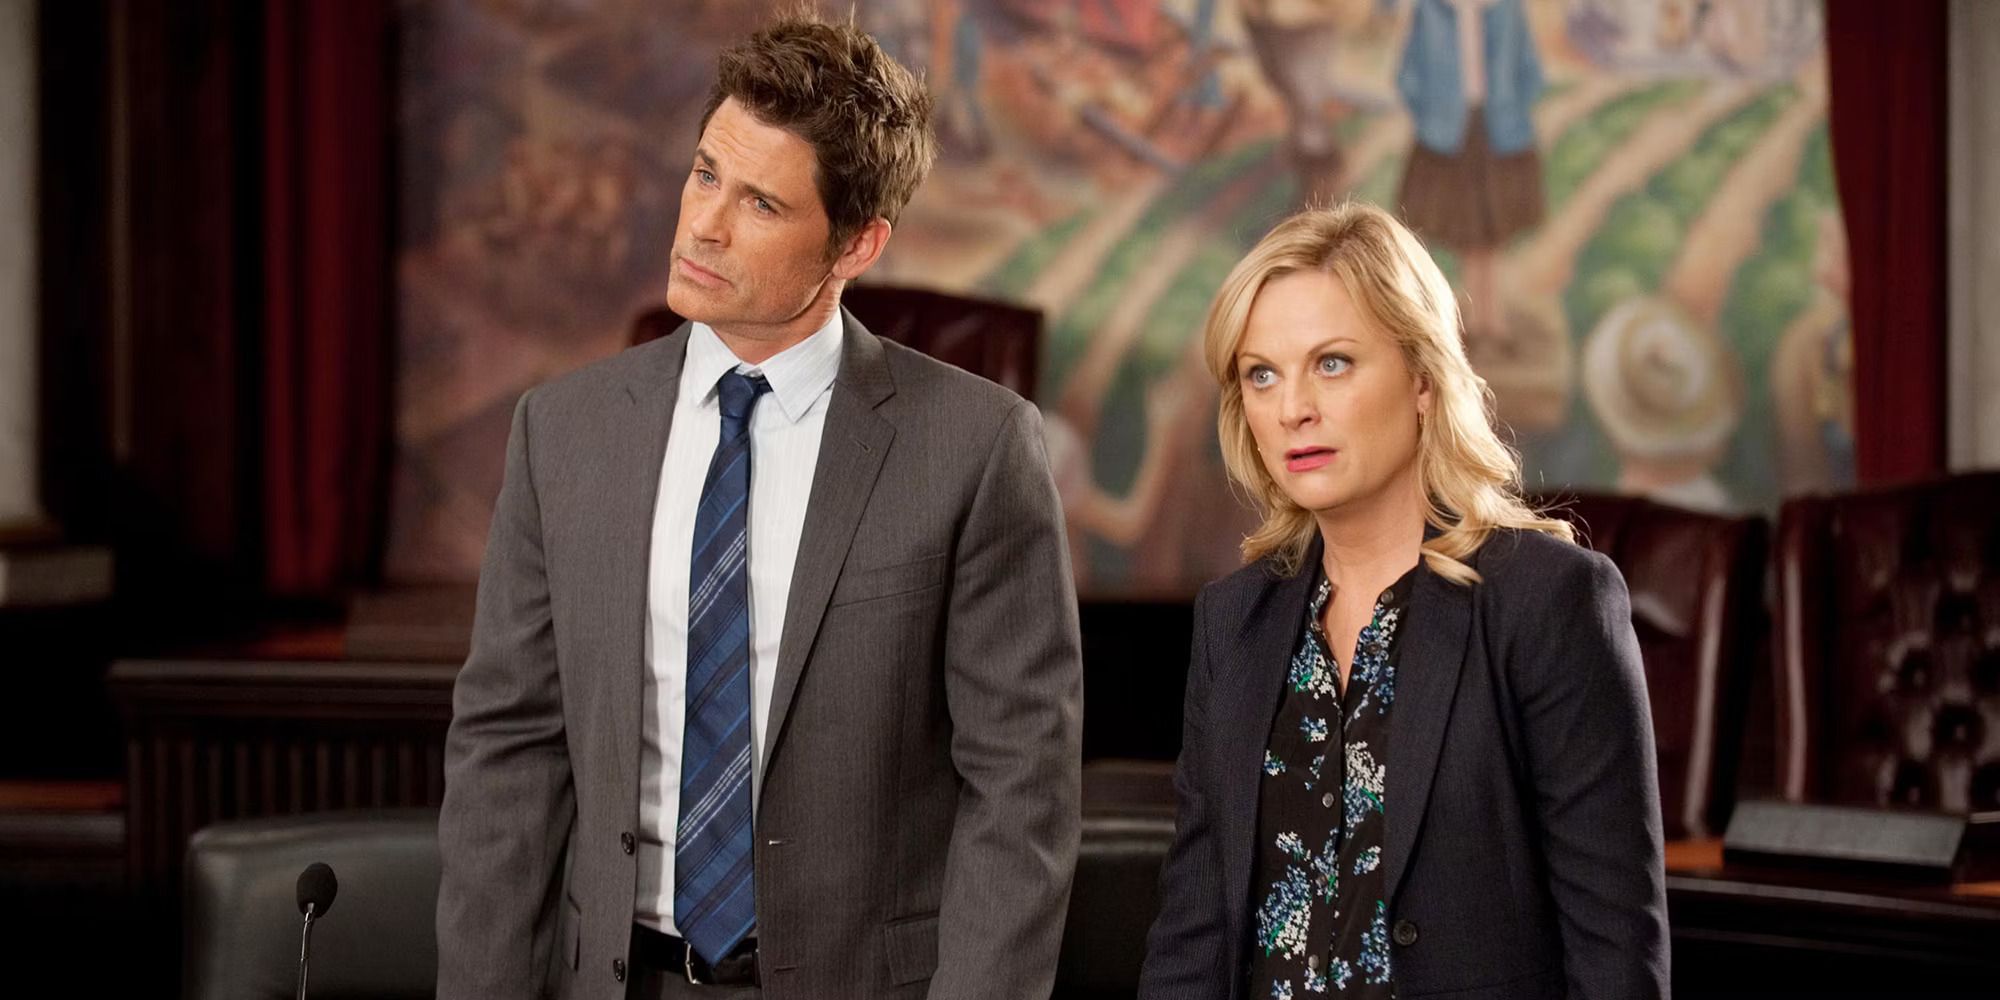 Rob Lowe as Chris Traeger and Amy Poehler as Leslie Knope in Parks And Recreation